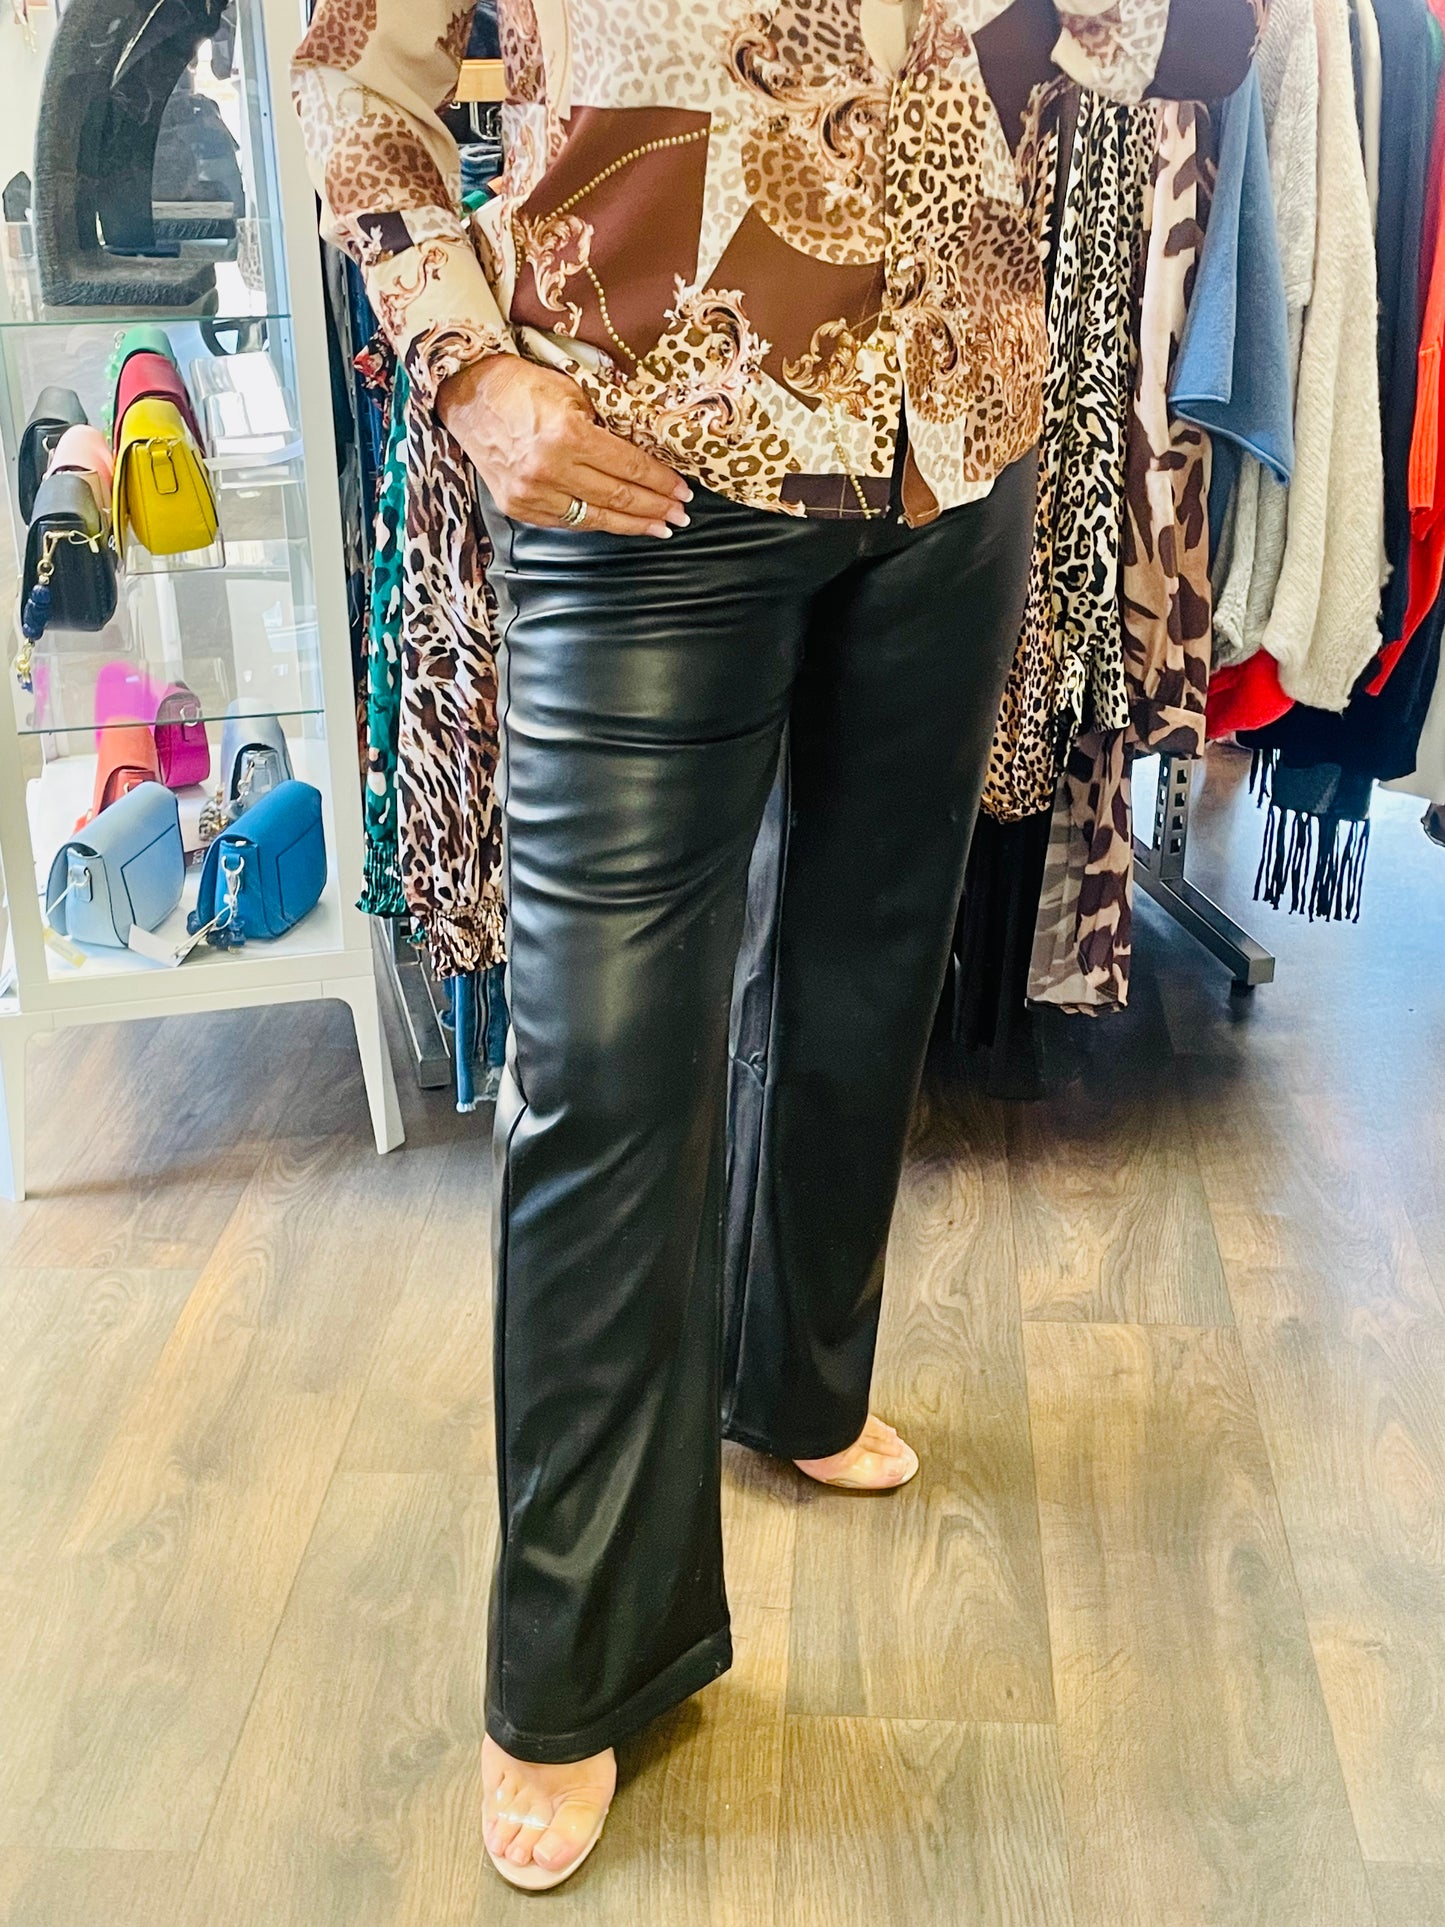 The XENIA vegan leather wide leg trousers